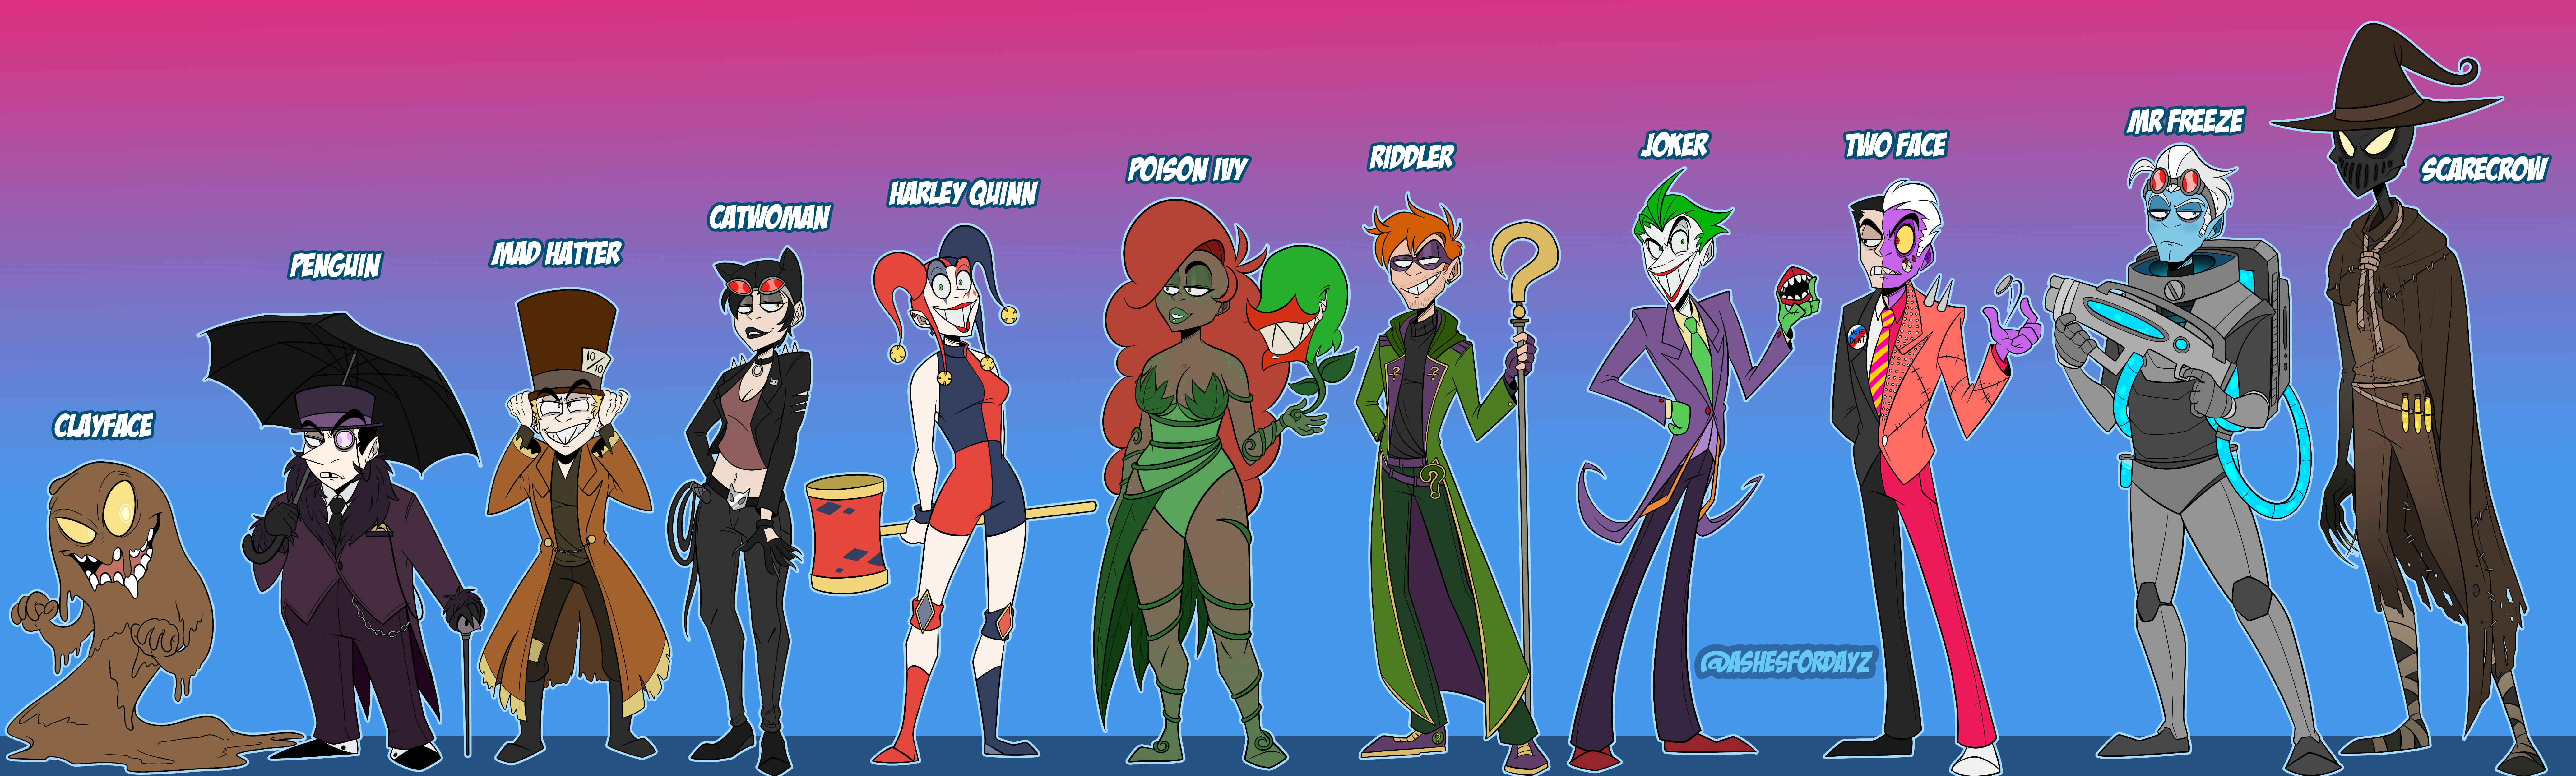 Batman's Rogues Gallery Part 1. by TheOmegas2 on DeviantArt